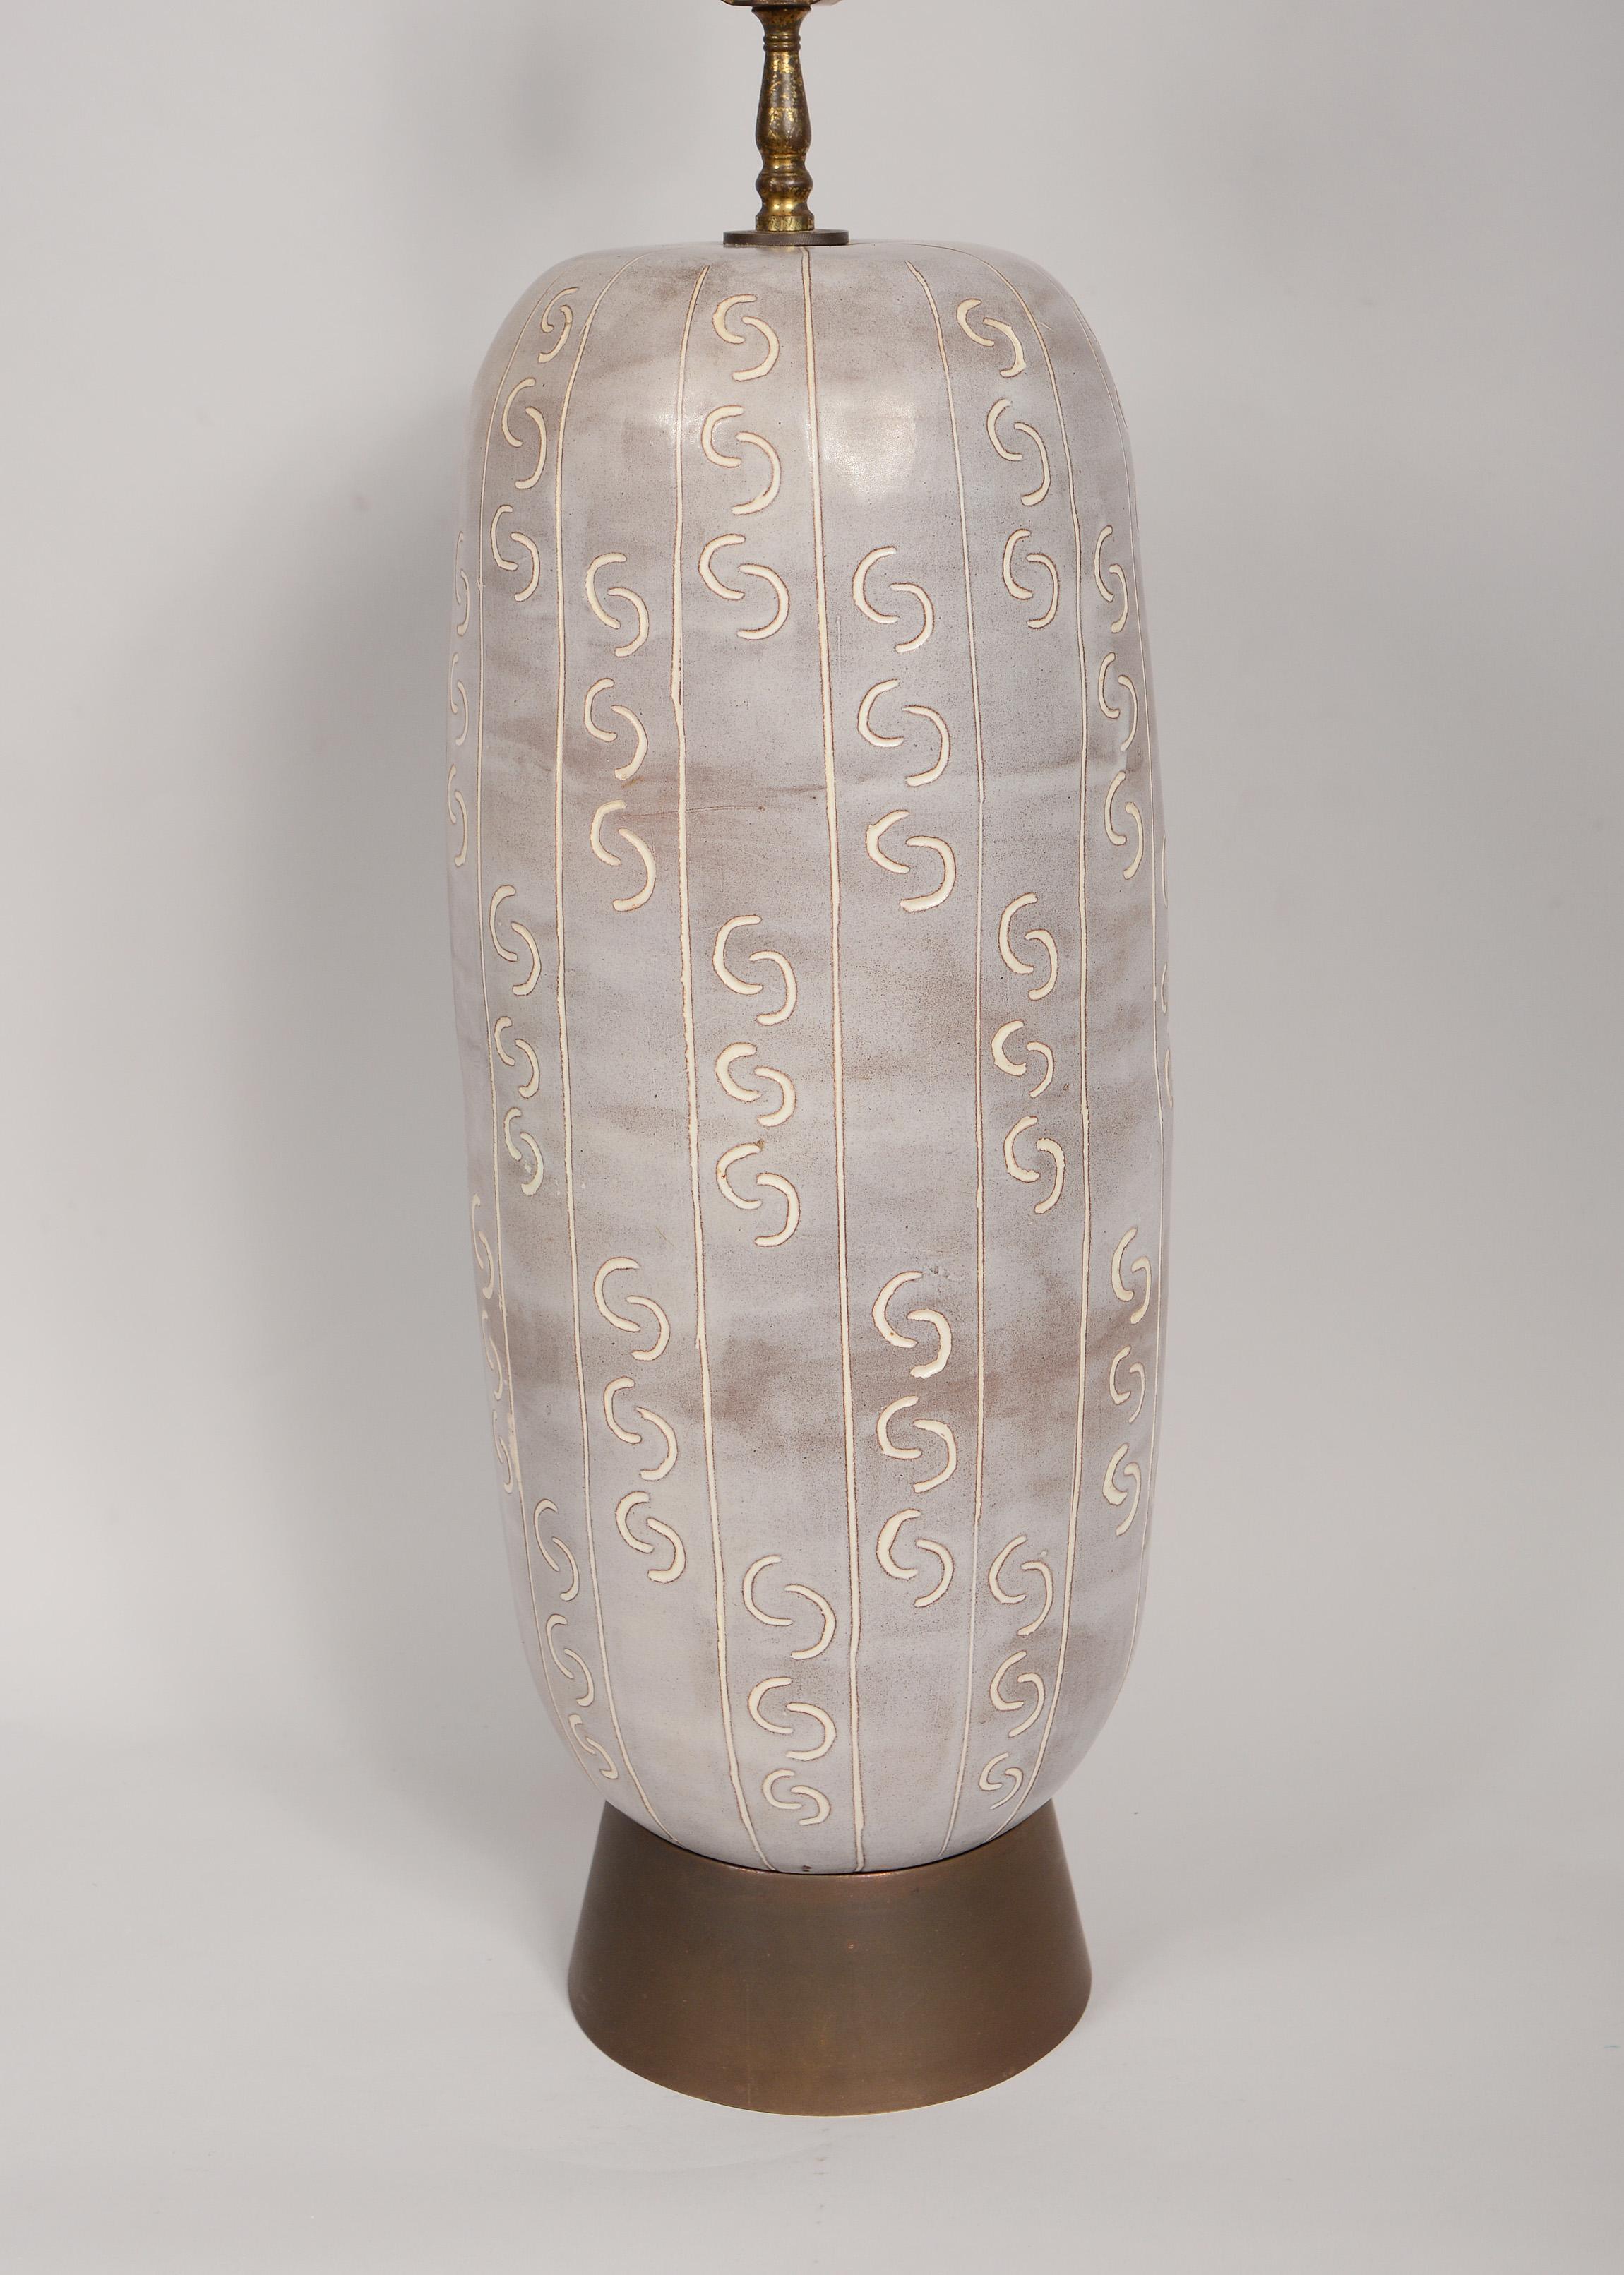 Studio ceramic table lamp with brass base. This lamp has a repetitive sgraffito design around it. This will be rewired with a cloth cord and three way socket. Height listed is to the top of the harp. The height to the bottom of the socket is 21.5